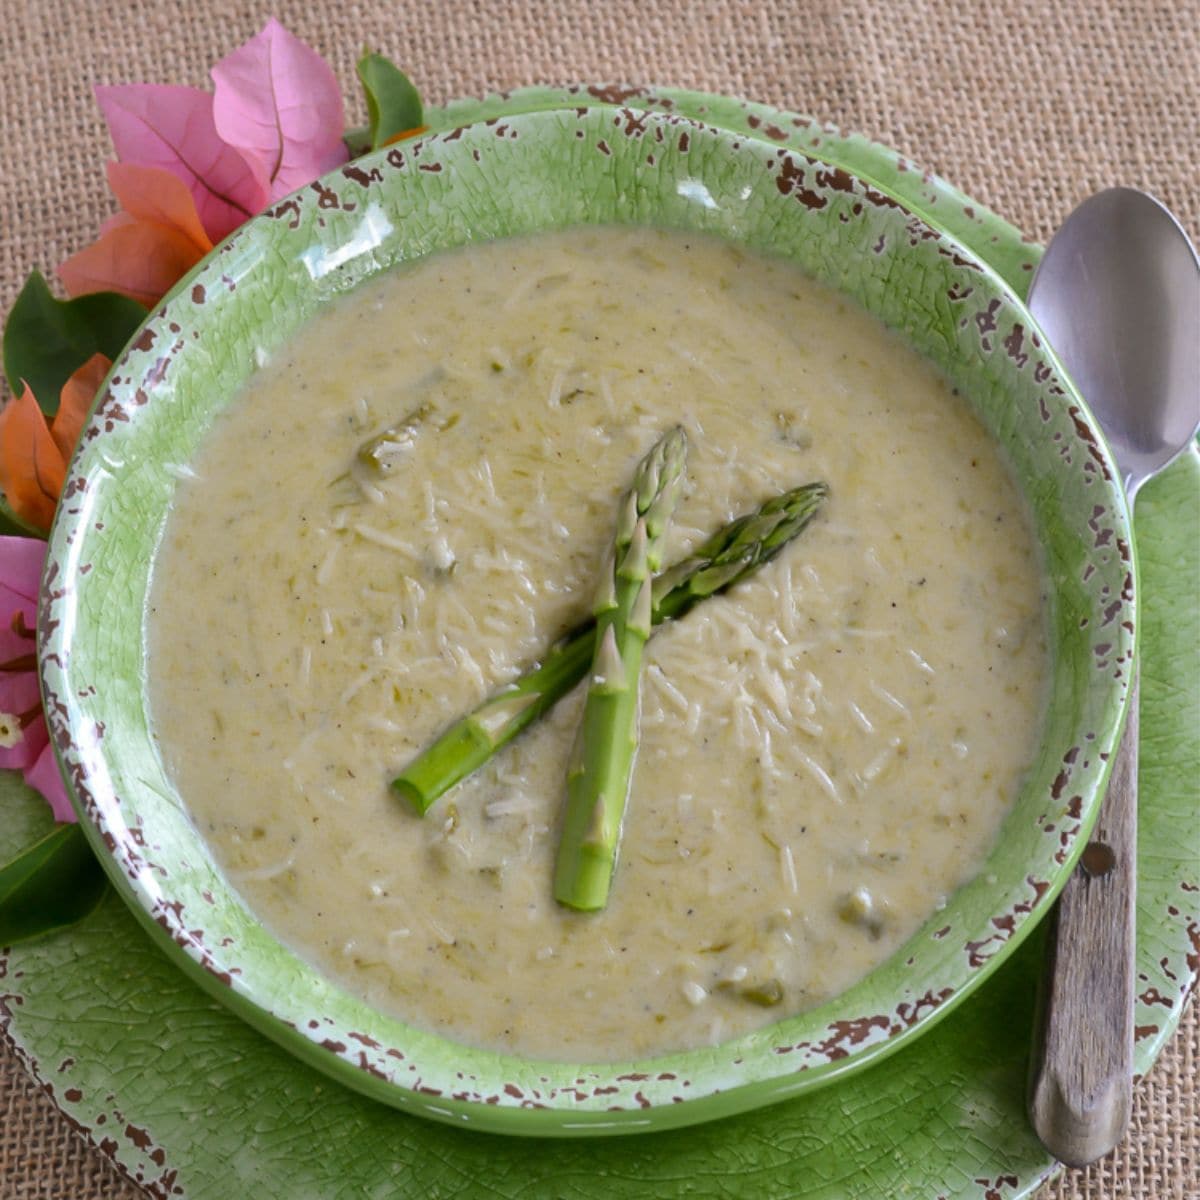 Cream of asparagus soup served in a green bowl with 2 spears of asparagus floating on the soup.